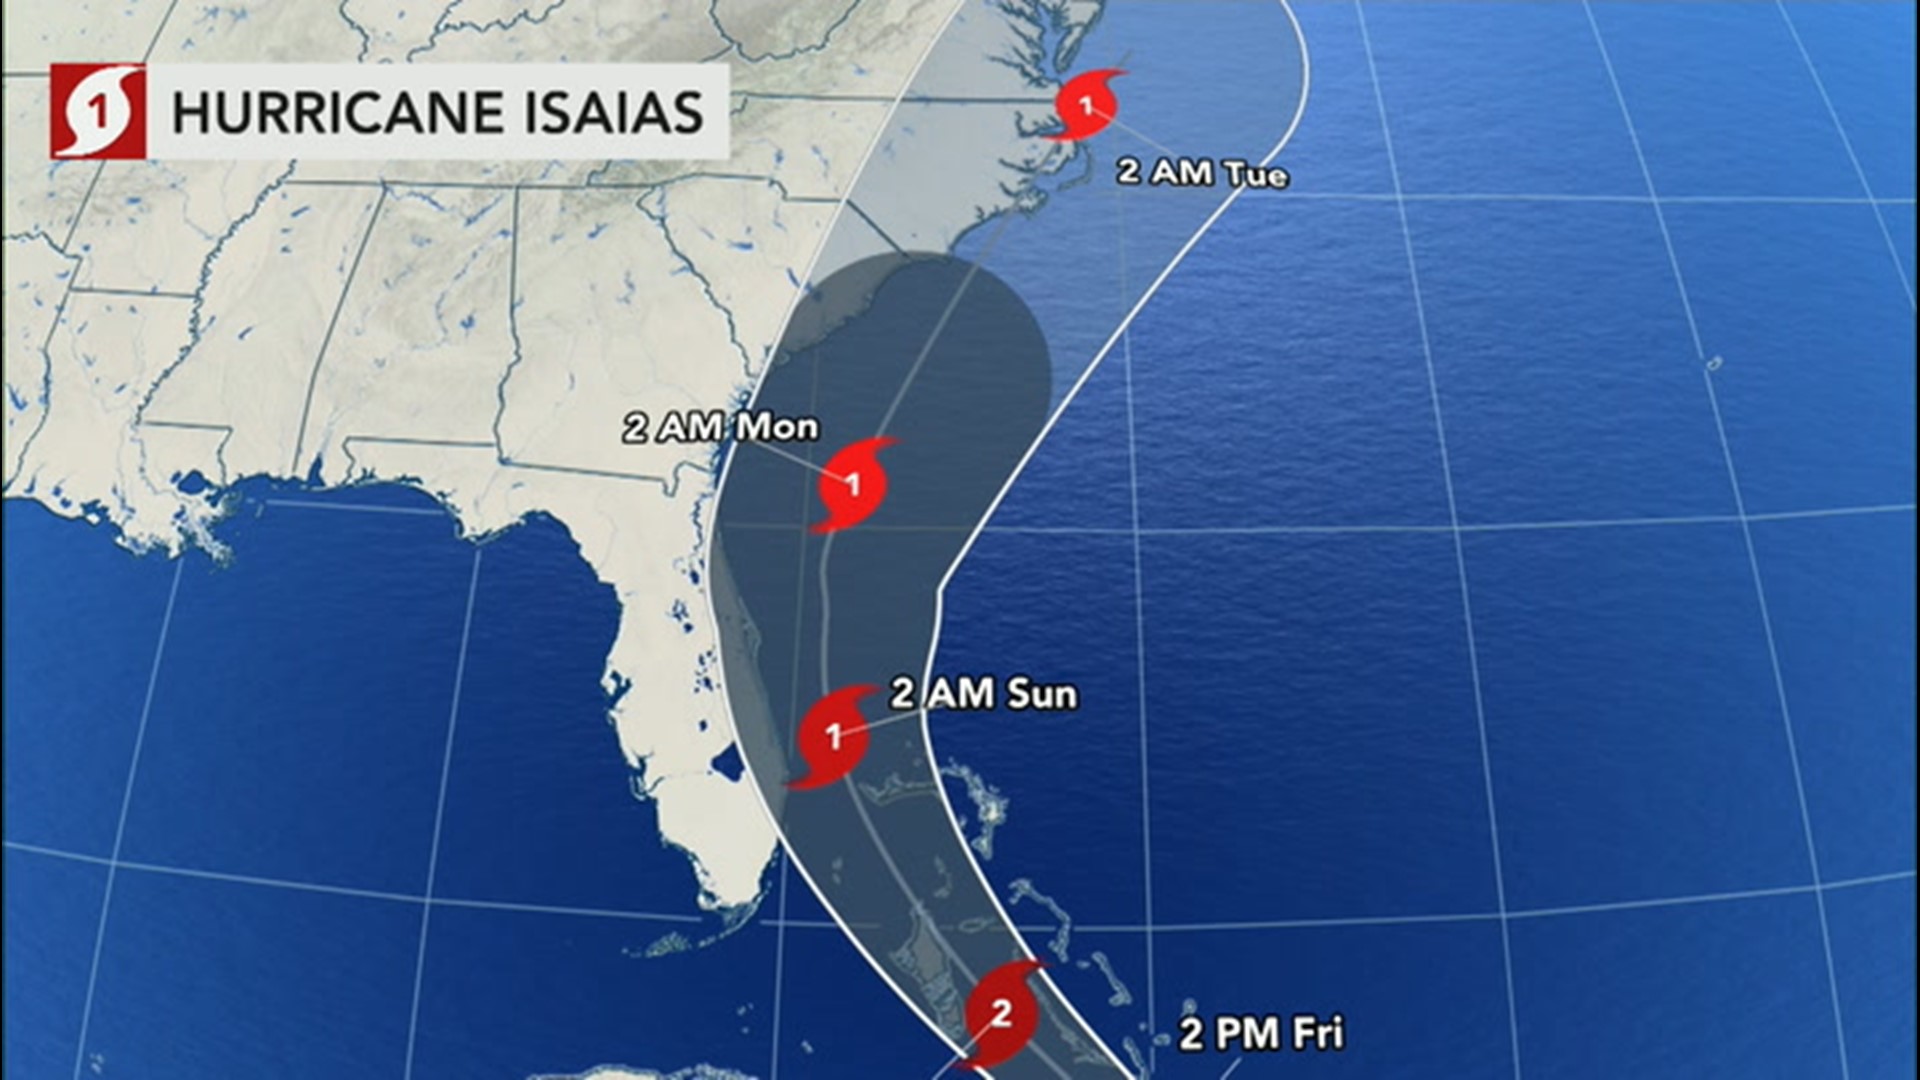 After slamming the Bahamas and the Turks and Caicos, Isaias will come dangerously close to the U.S. Bernie Rayno has the latest forecast on the storm's track.